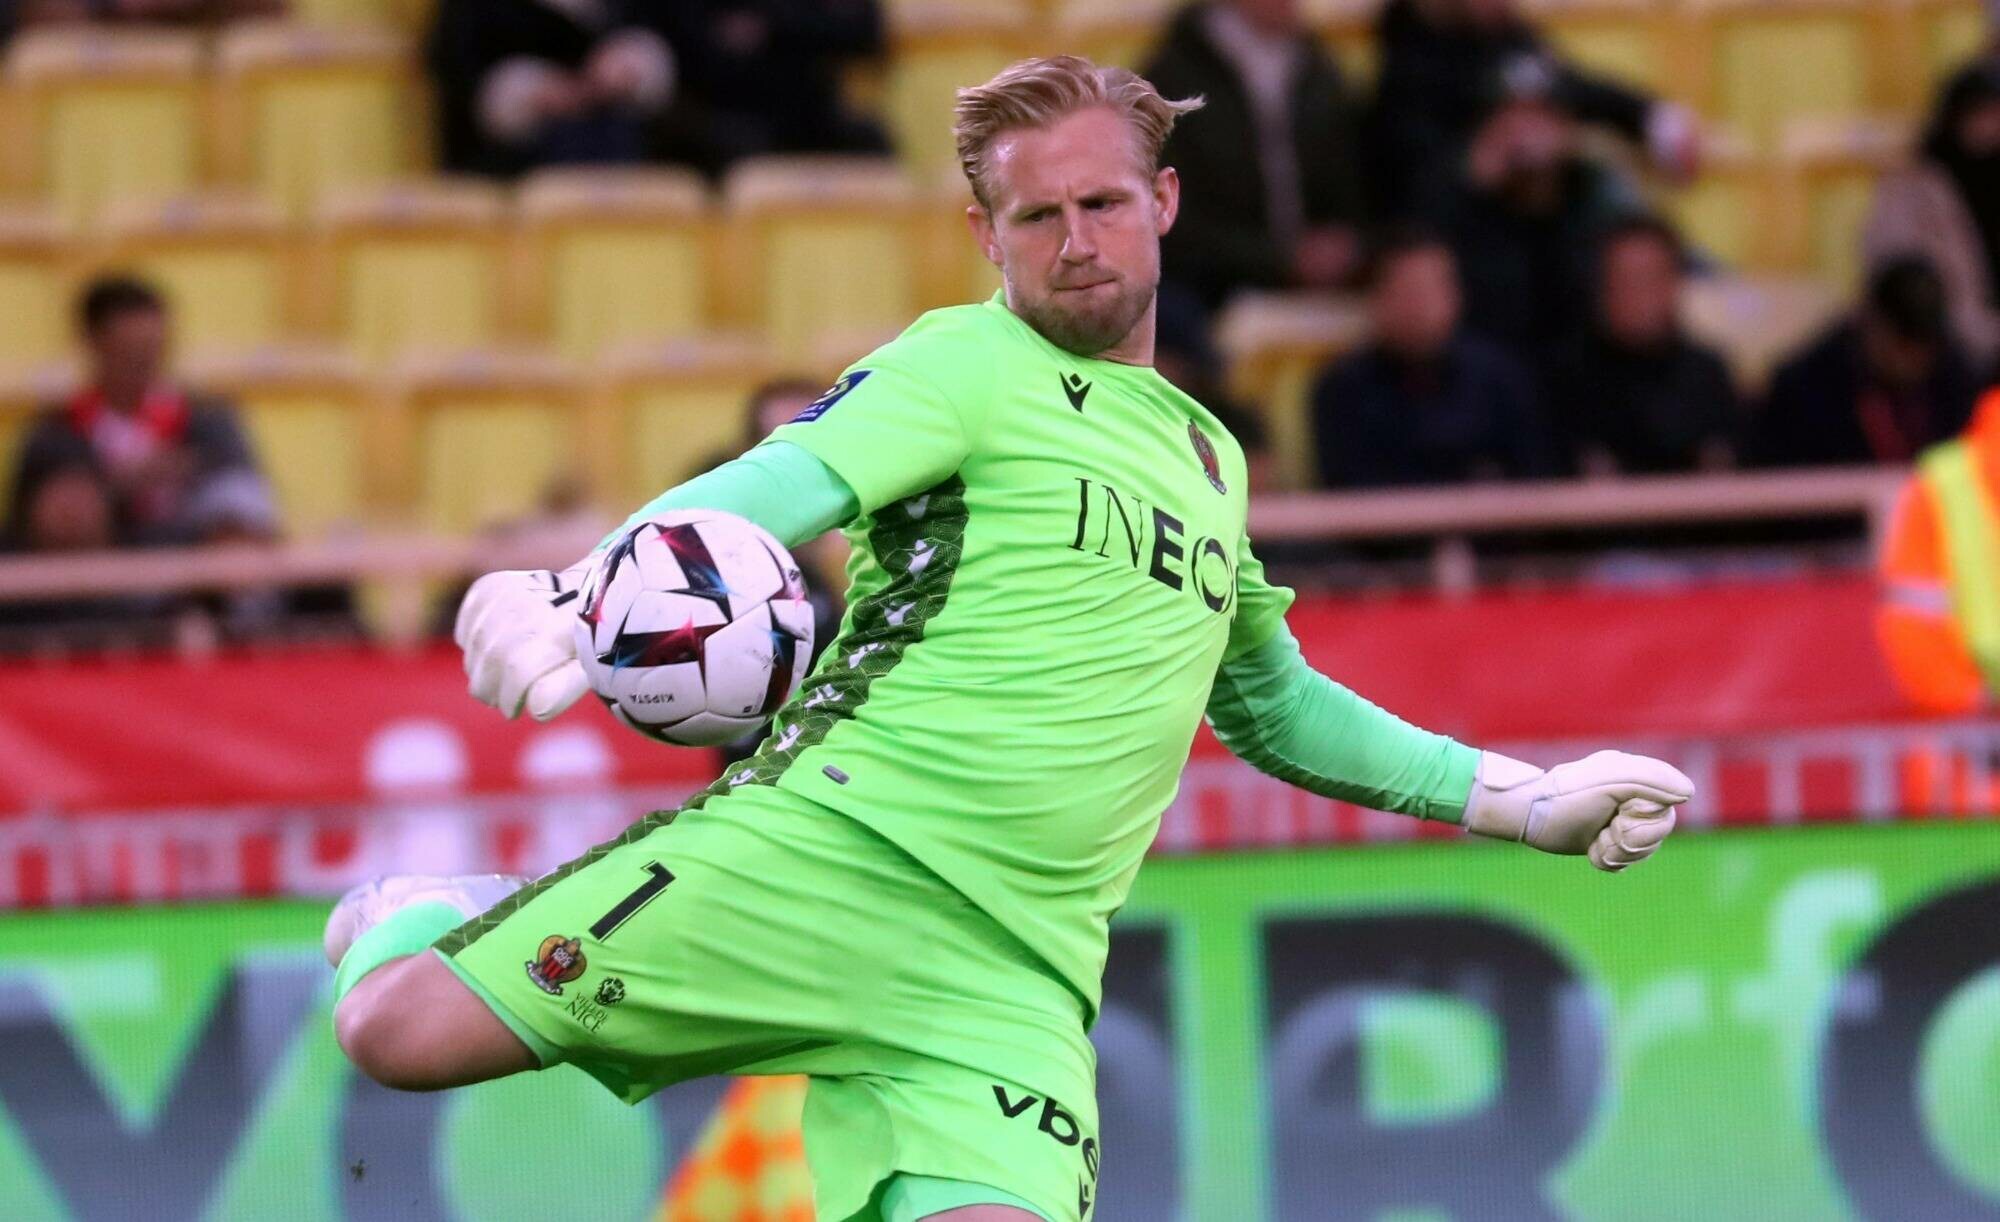 Schmeichel backs Ratcliffe to succeed at Man United